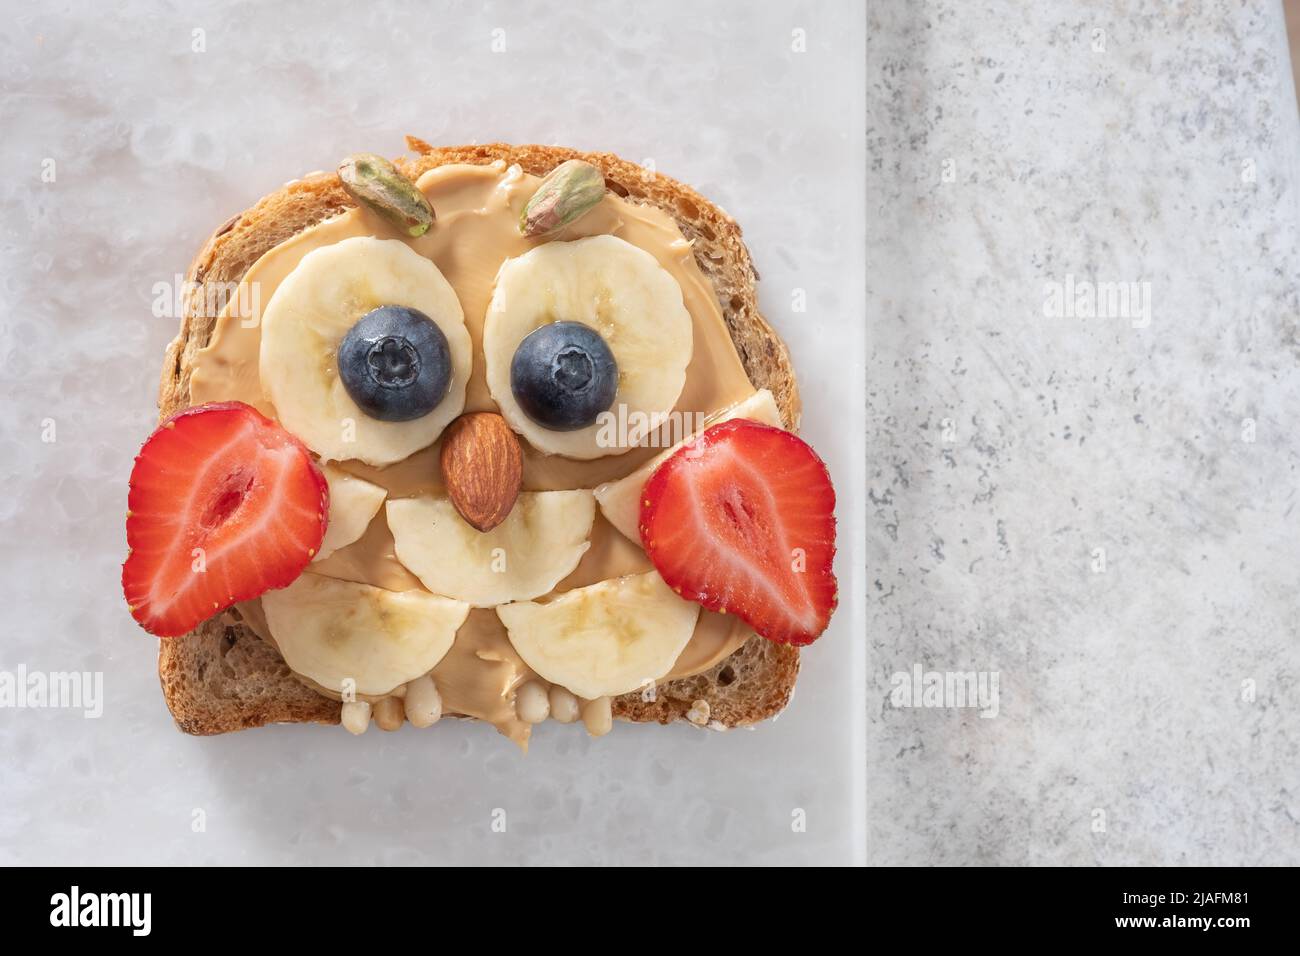 Kids breakfast or lunch or snack toast with peanut butter spread, banana, strawberry and blueberry shaped as cute owl. Stock Photo